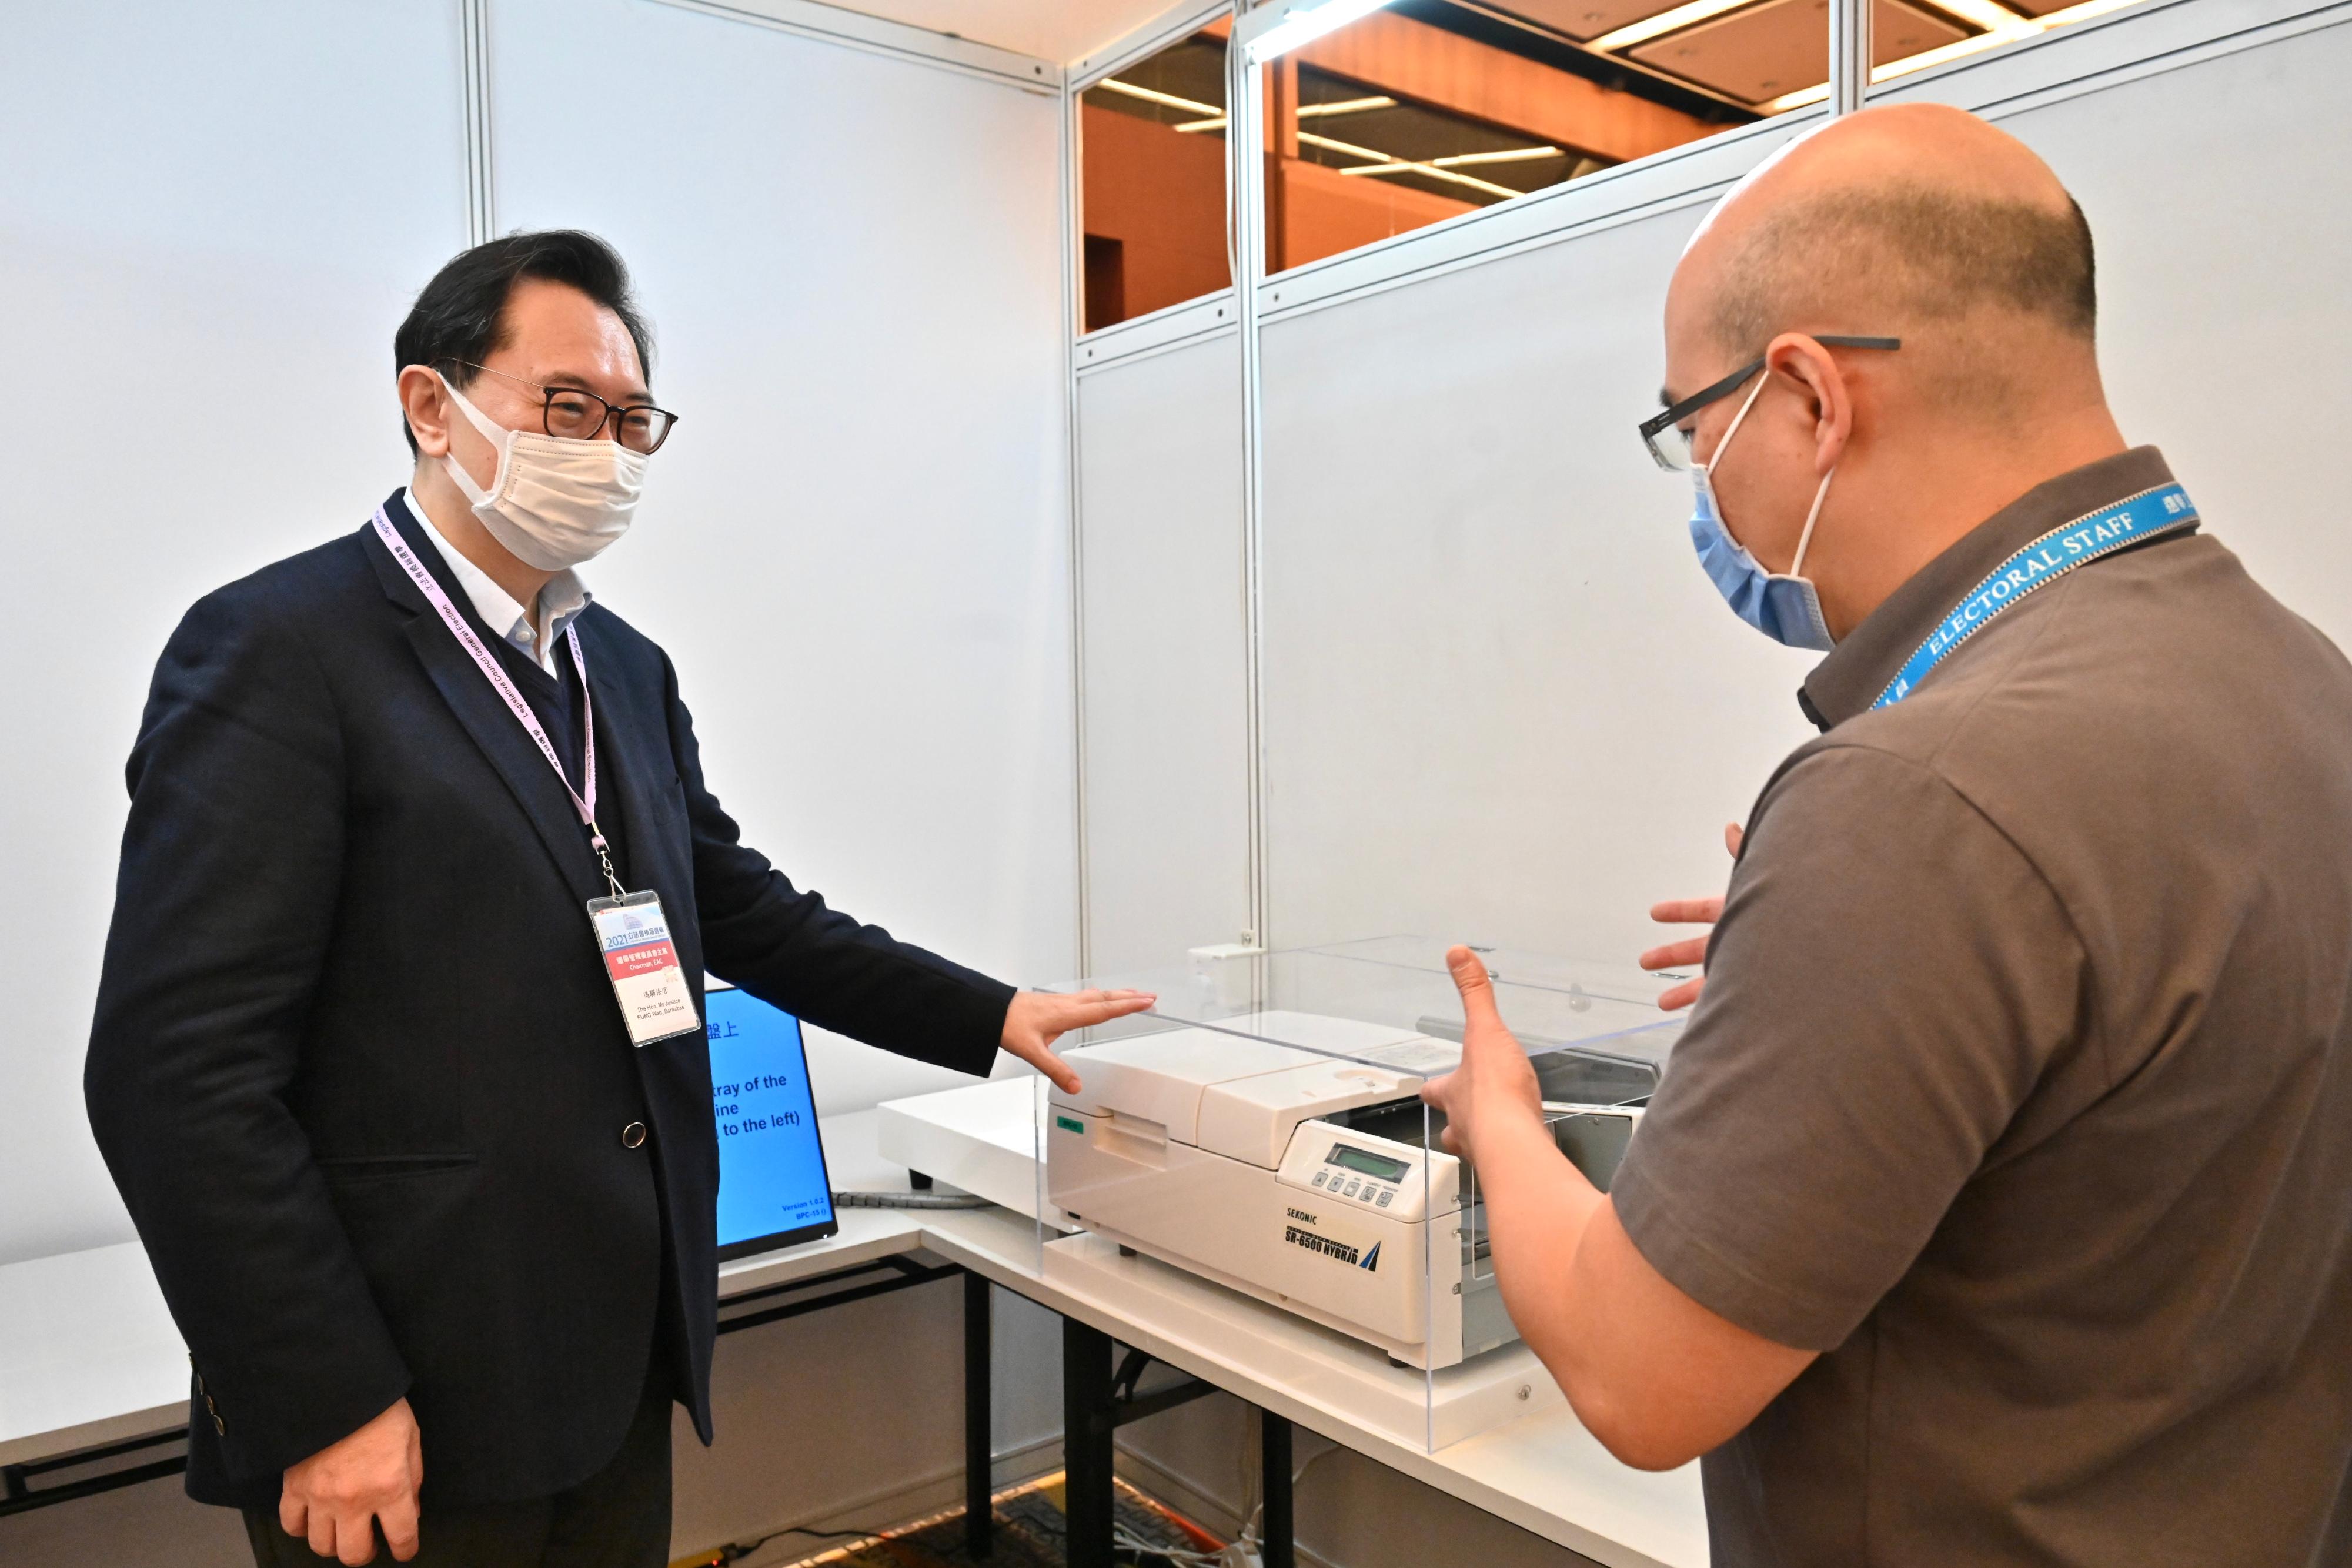 The Chairman of the Electoral Affairs Commission, Mr Justice Barnabas Fung Wah (left), visits the Election Committee Constituency polling station of the 2021 Legislative Council General Election at the Hong Kong Convention and Exhibition Centre this morning (December 18) to inspect the preparatory work. He is briefed by the Presiding Officer on the operation of Optical Mark Recognition machines.
